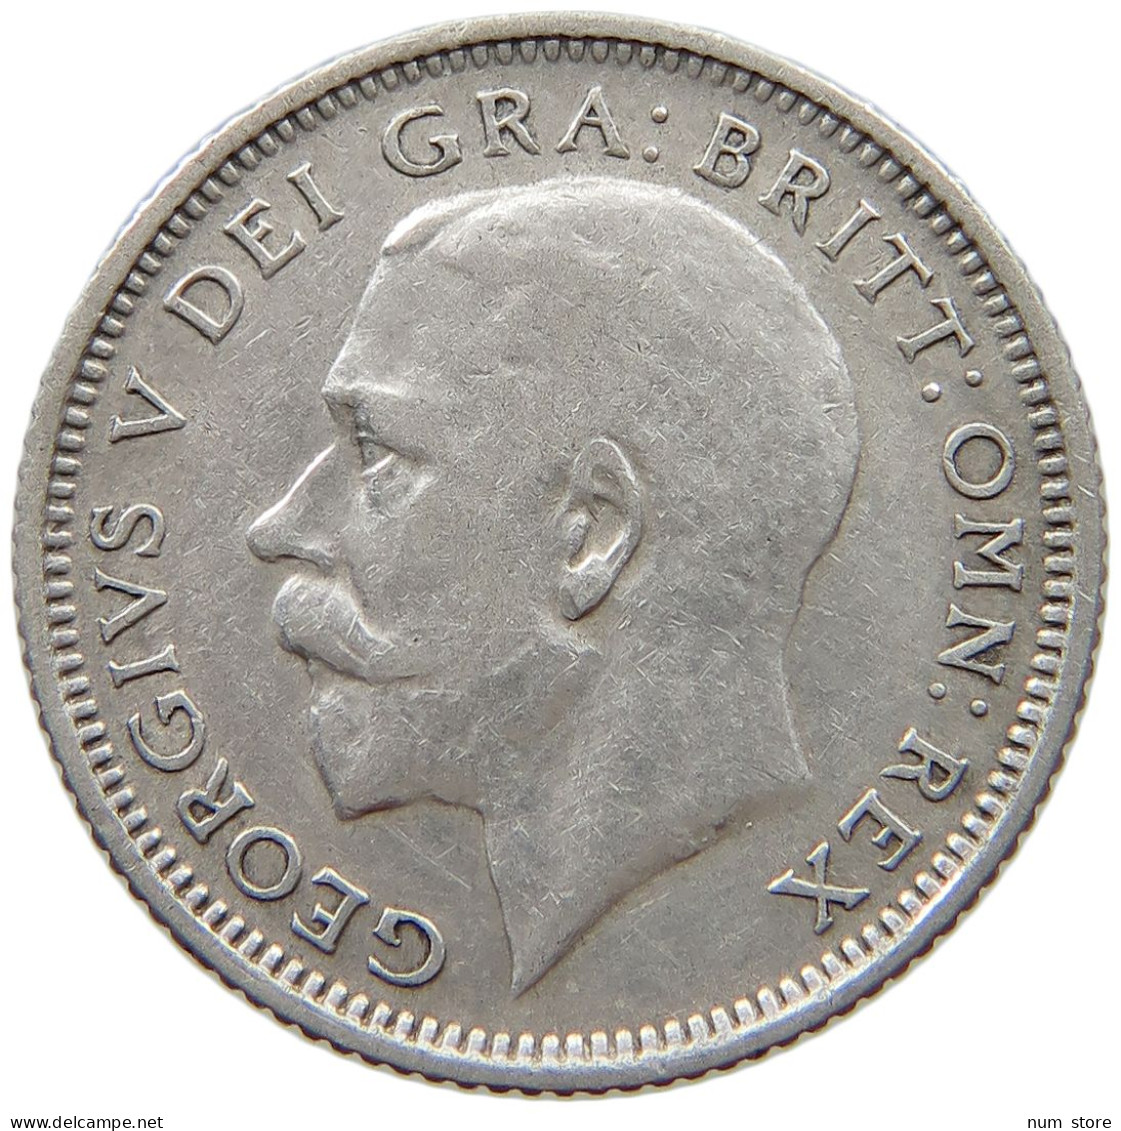 GREAT BRITAIN SIXPENCE 1926 George V. (1910-1936) #t148 0611 - H. 6 Pence